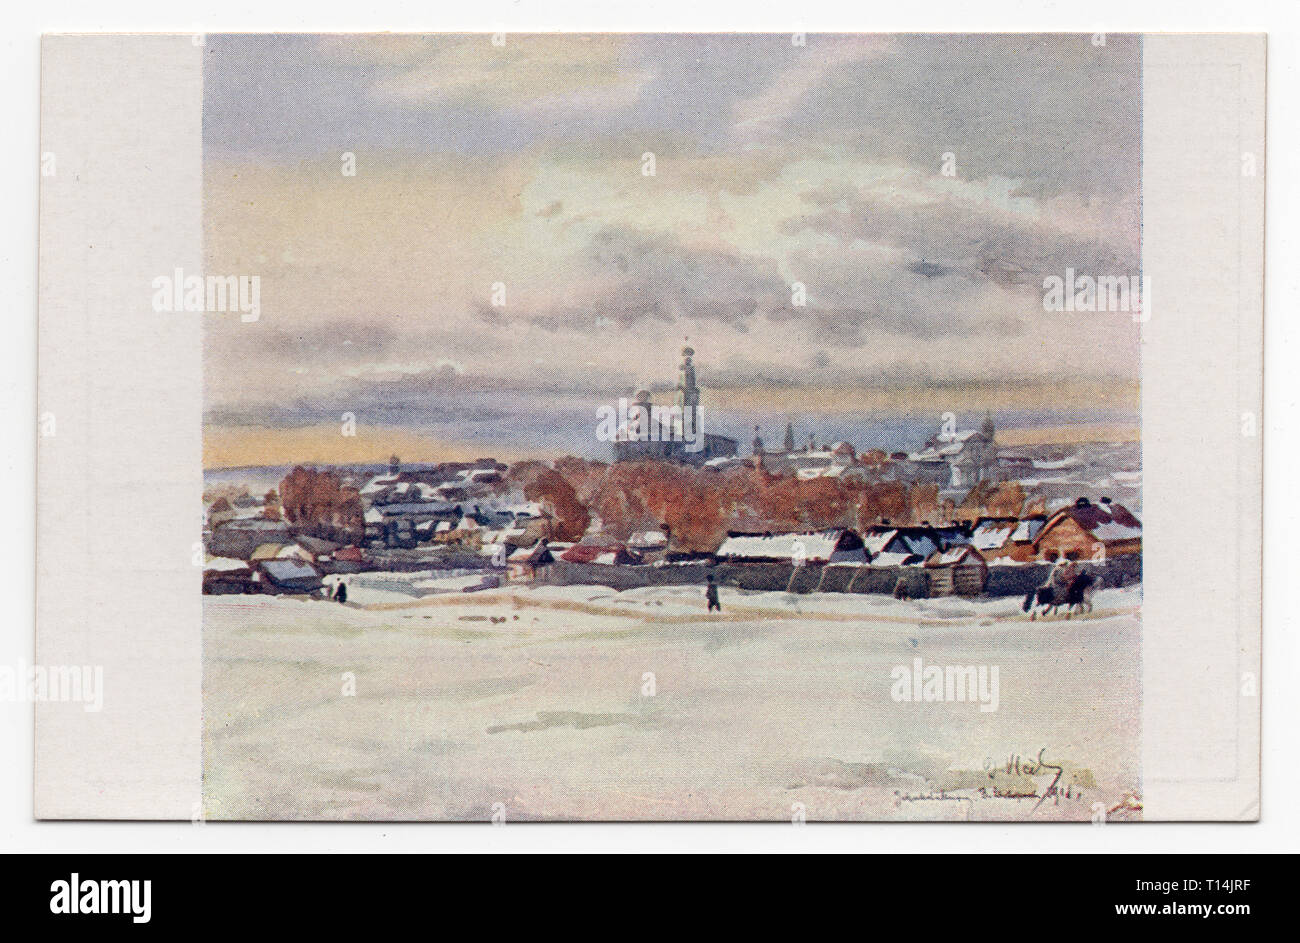 View of Yekaterinburg, Russia, depicted in the watercolour painting by Czech artist Jindřich Vlček (1918) printed on the Czechoslovak vintage postcard from the series 'Pictures from the life and fights of the Czechoslovak legions in Russia' ('Pohledy ze života a bojů československých legií v Rusku') issued in Czechoslovakia in the 1920s. The Ascension Church on Voznesenskaya Hill is seen in the background. Courtesy of the Azoor Postcard Collection. Stock Photo